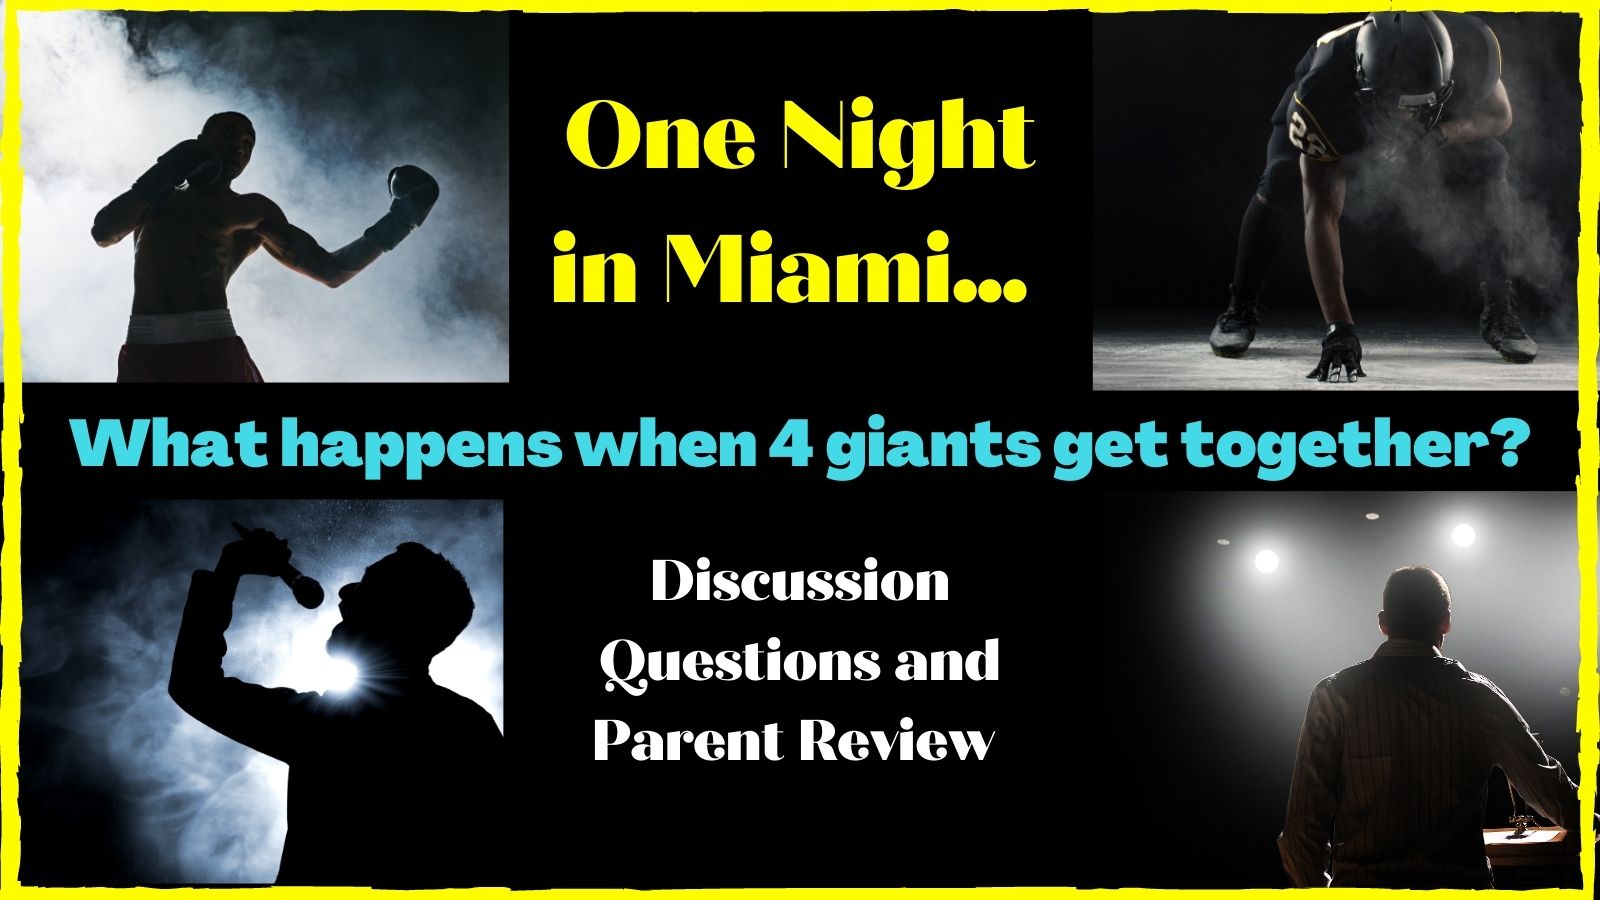 One Night in Miami Parent Review